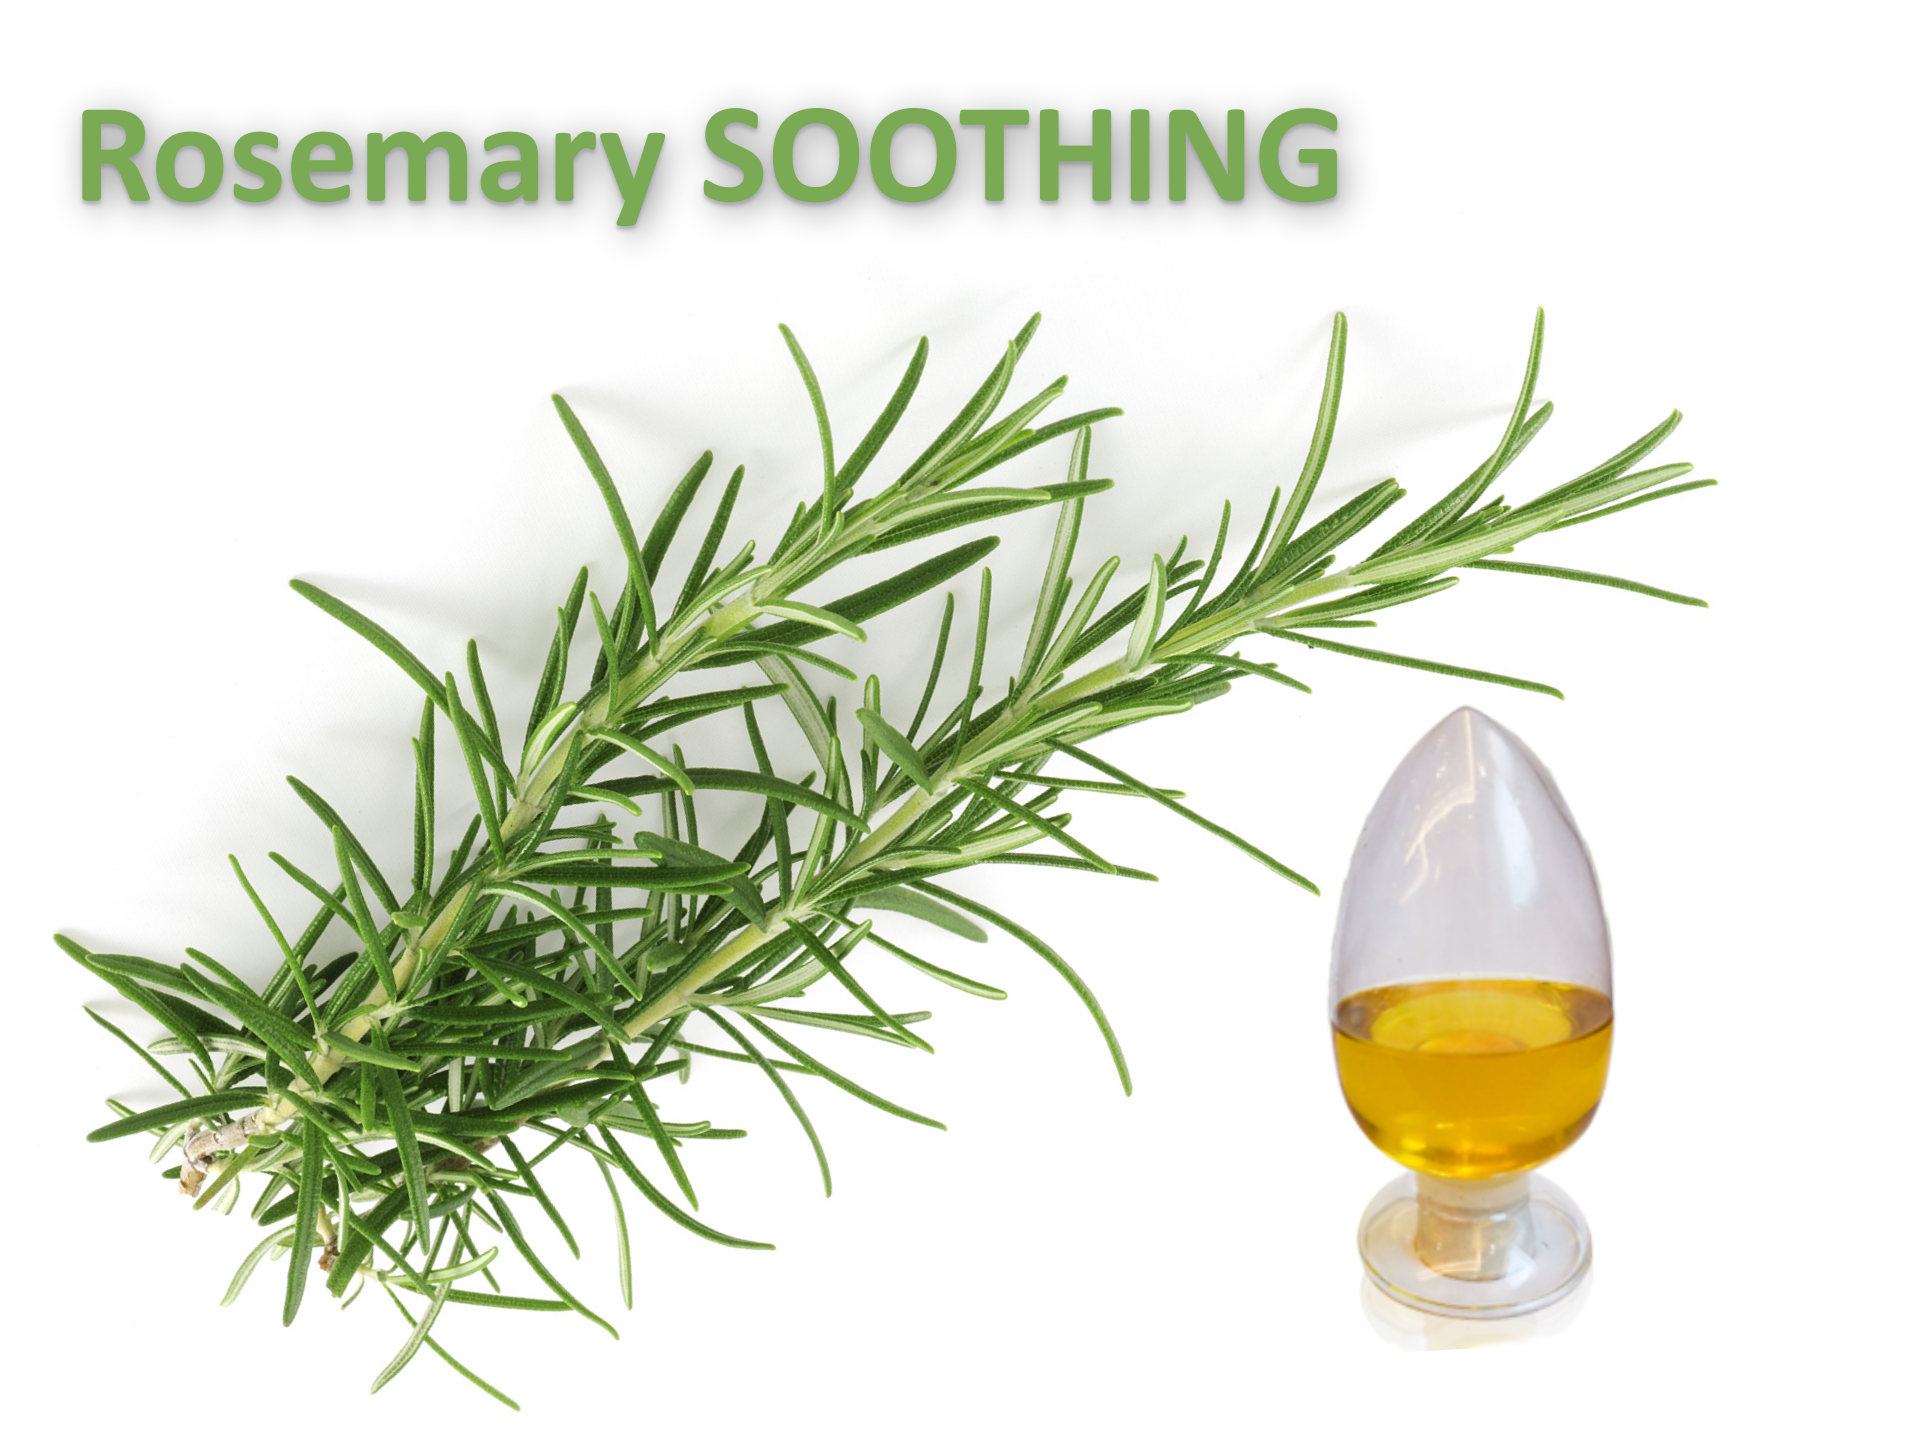 Rosemary SOOTHING